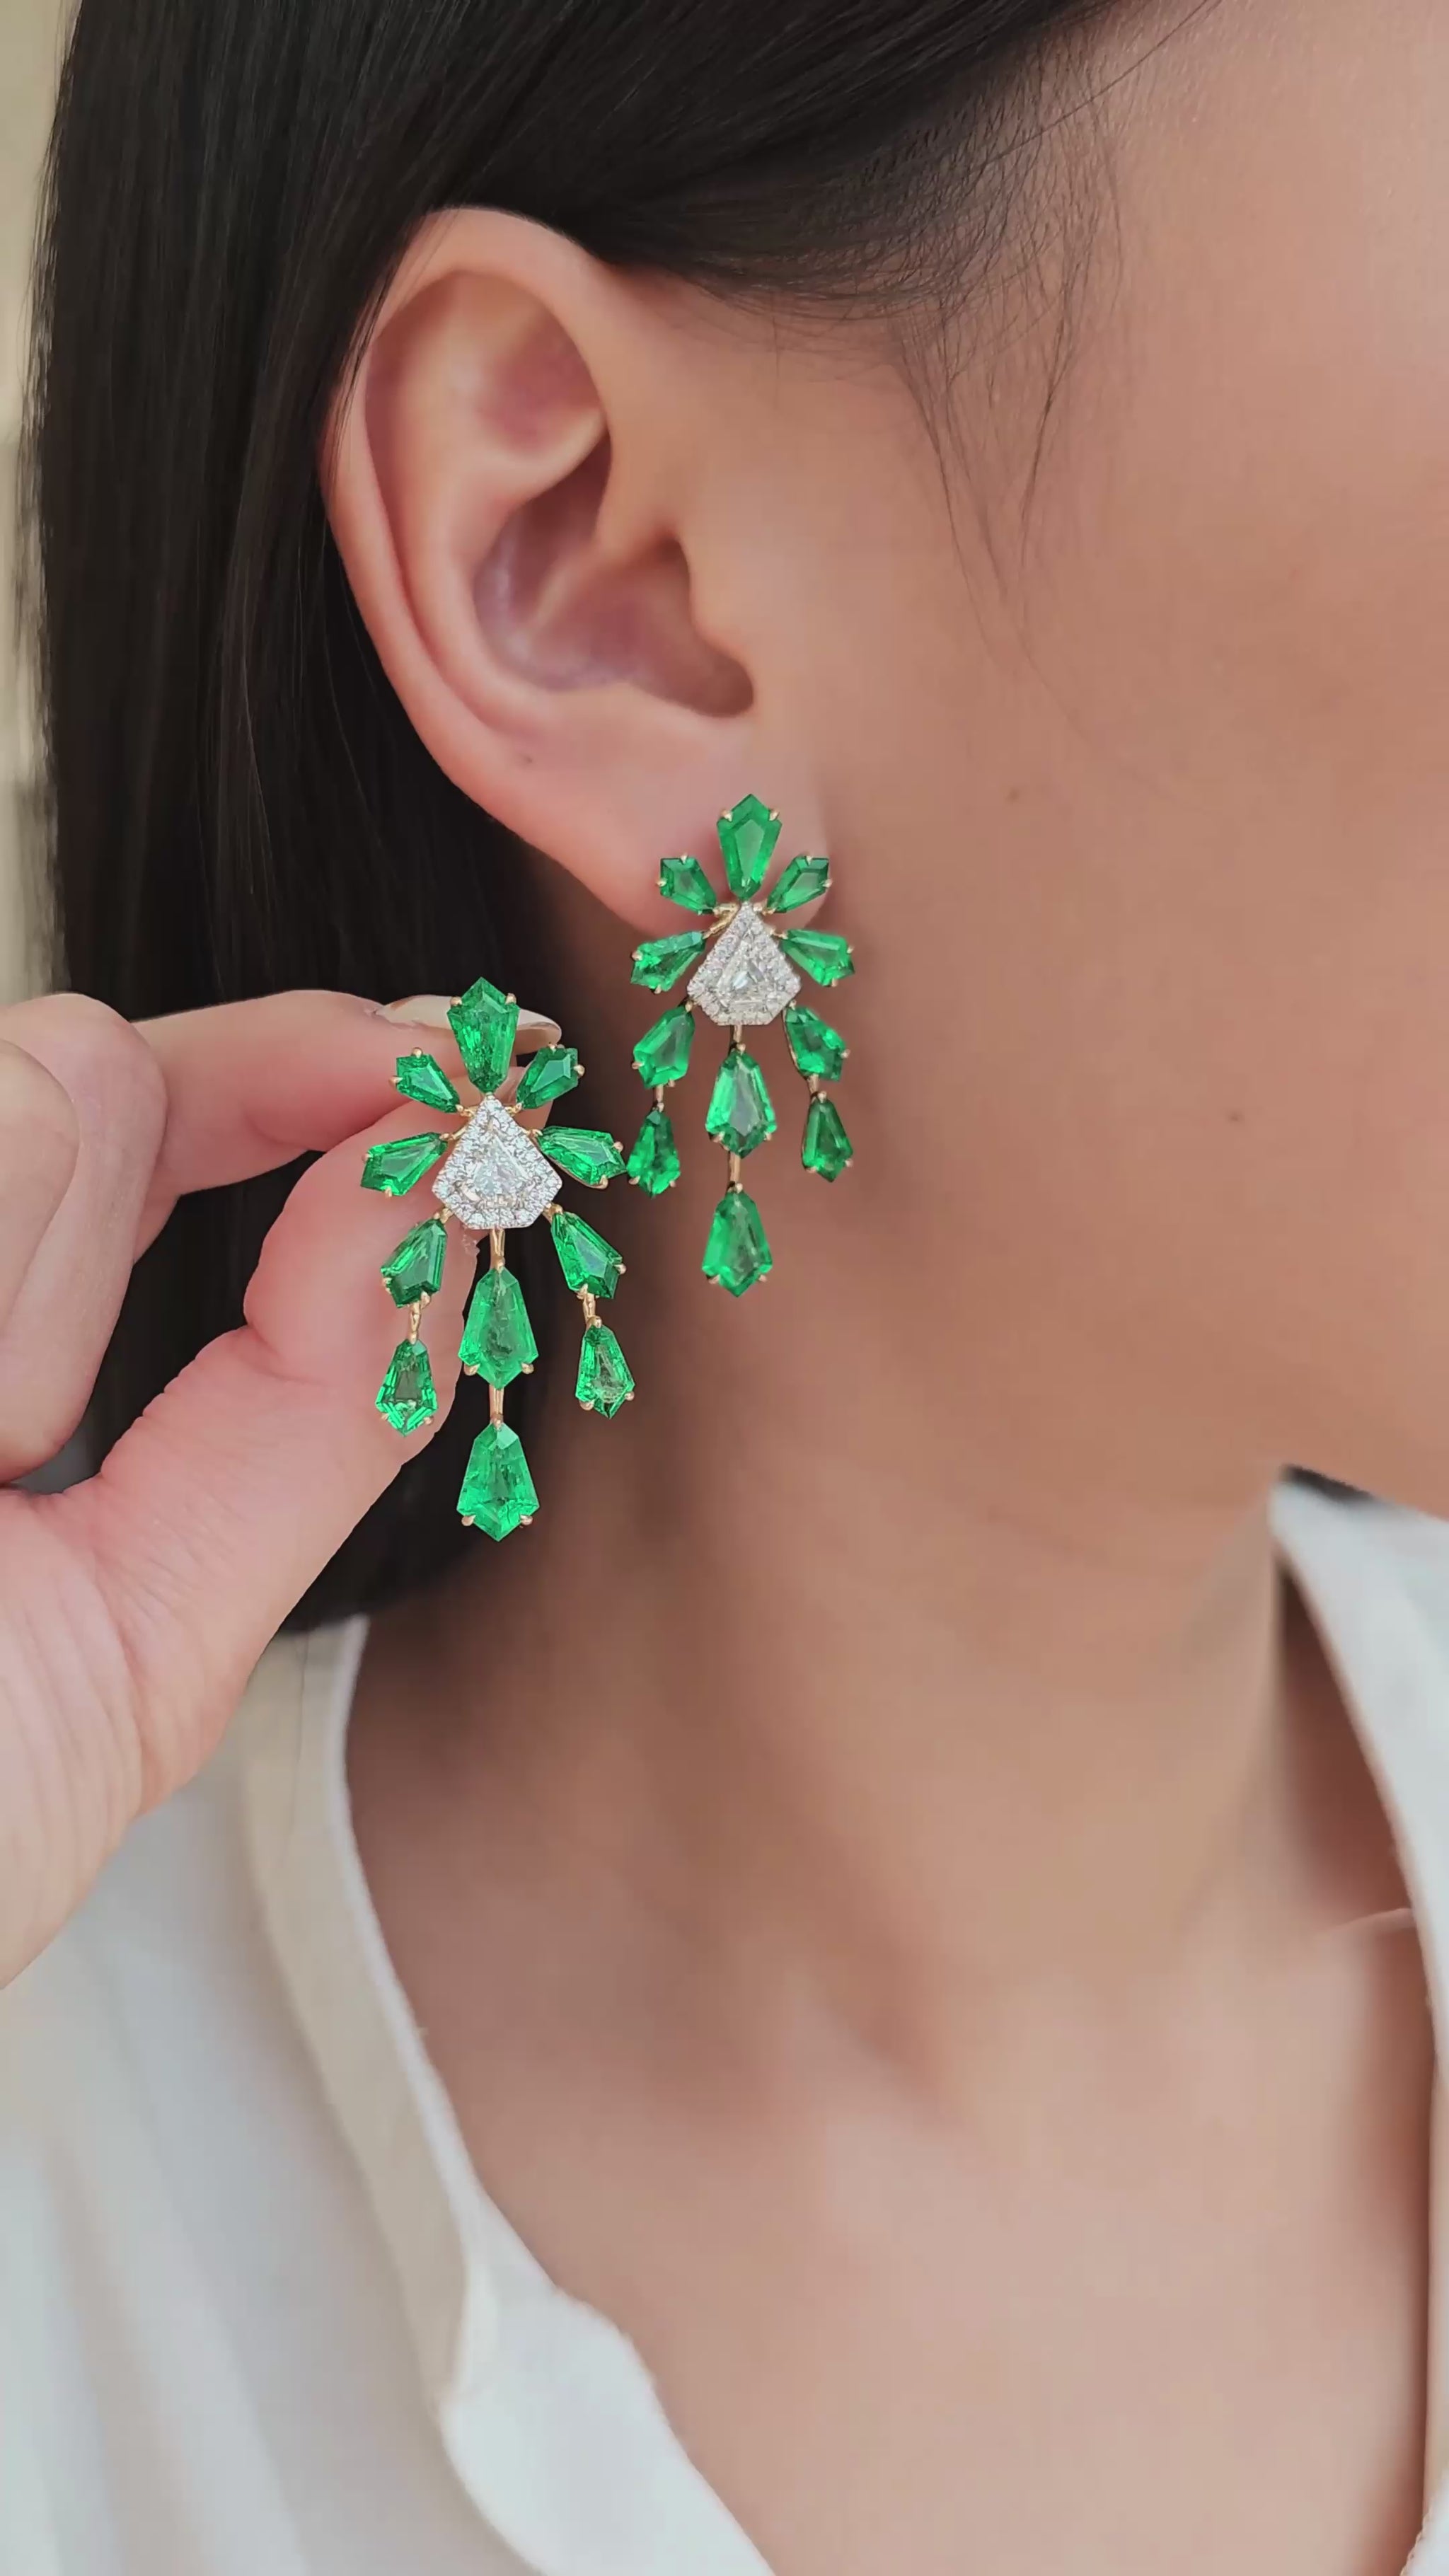 8.83 cts Emerald with Diamond Earrings